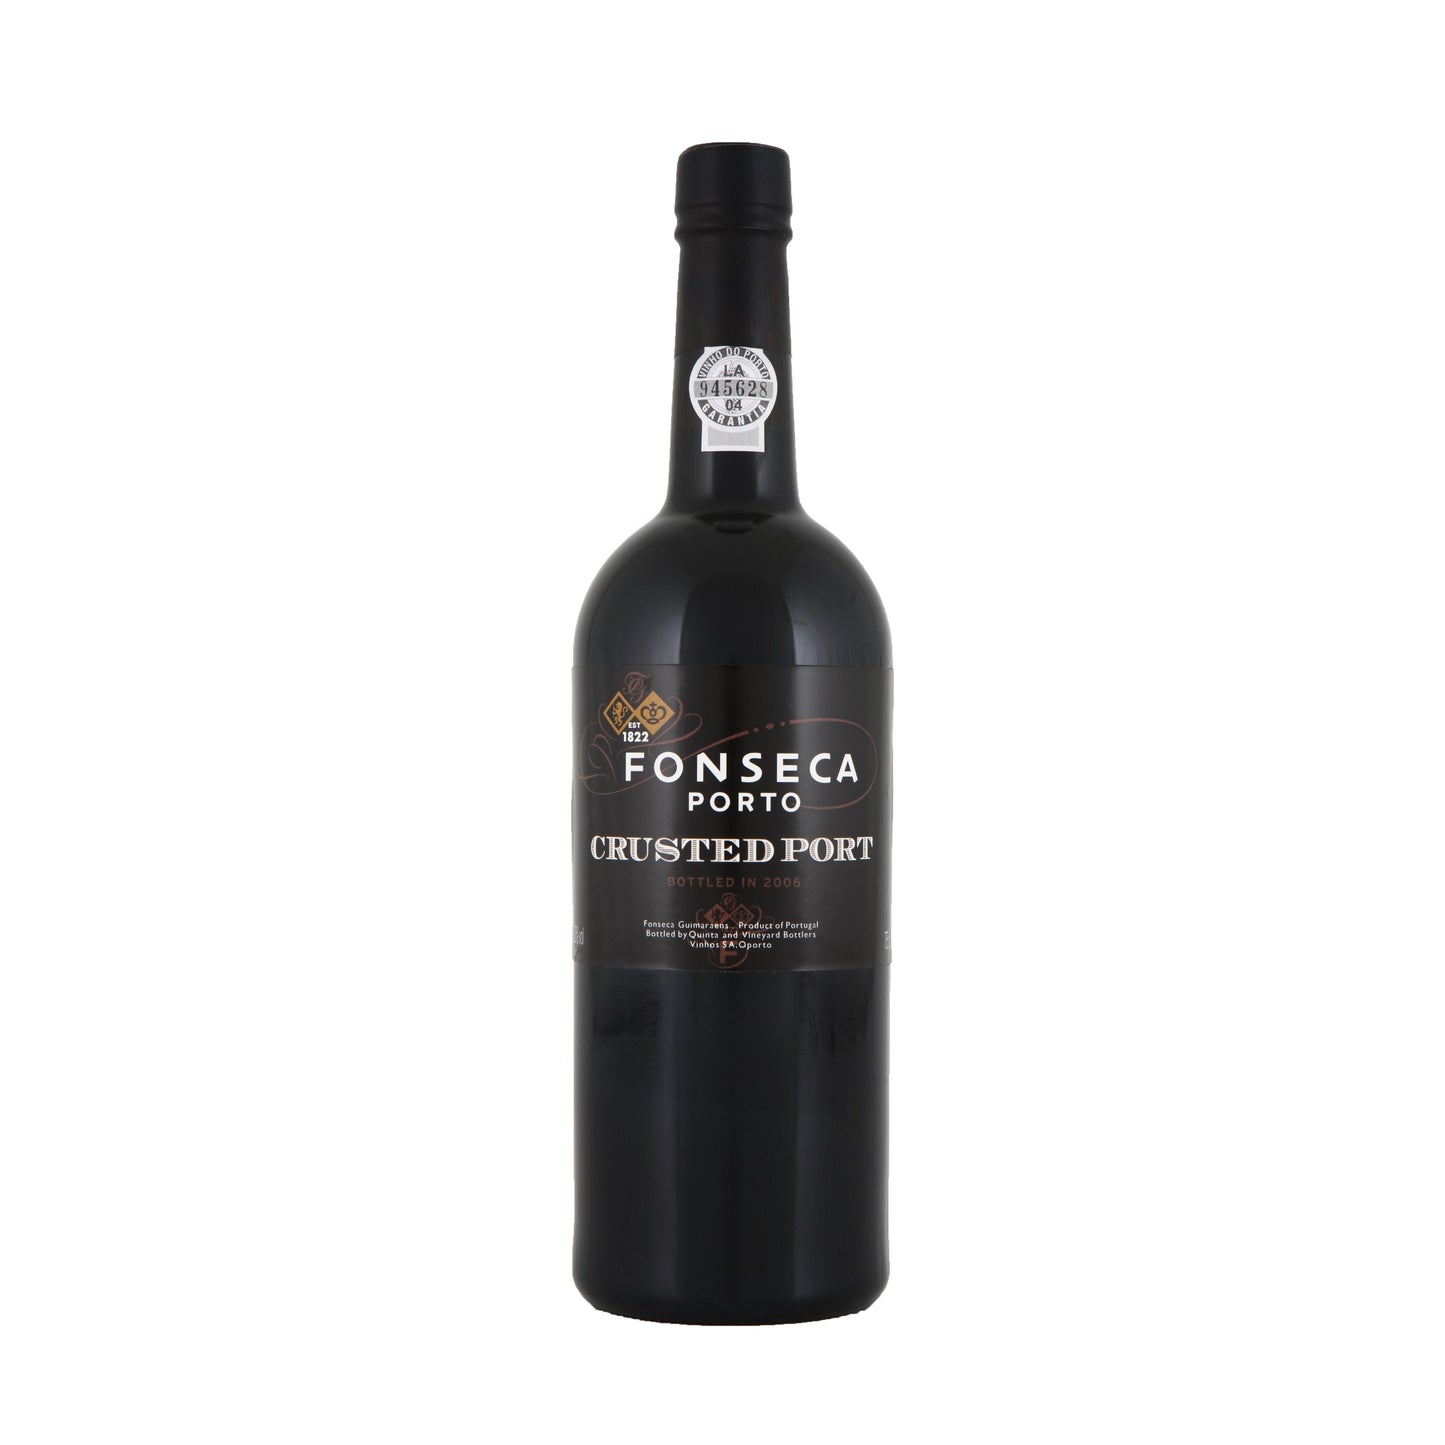 Fonseca Crusted Port-Port-5013521103568-Fountainhall Wines